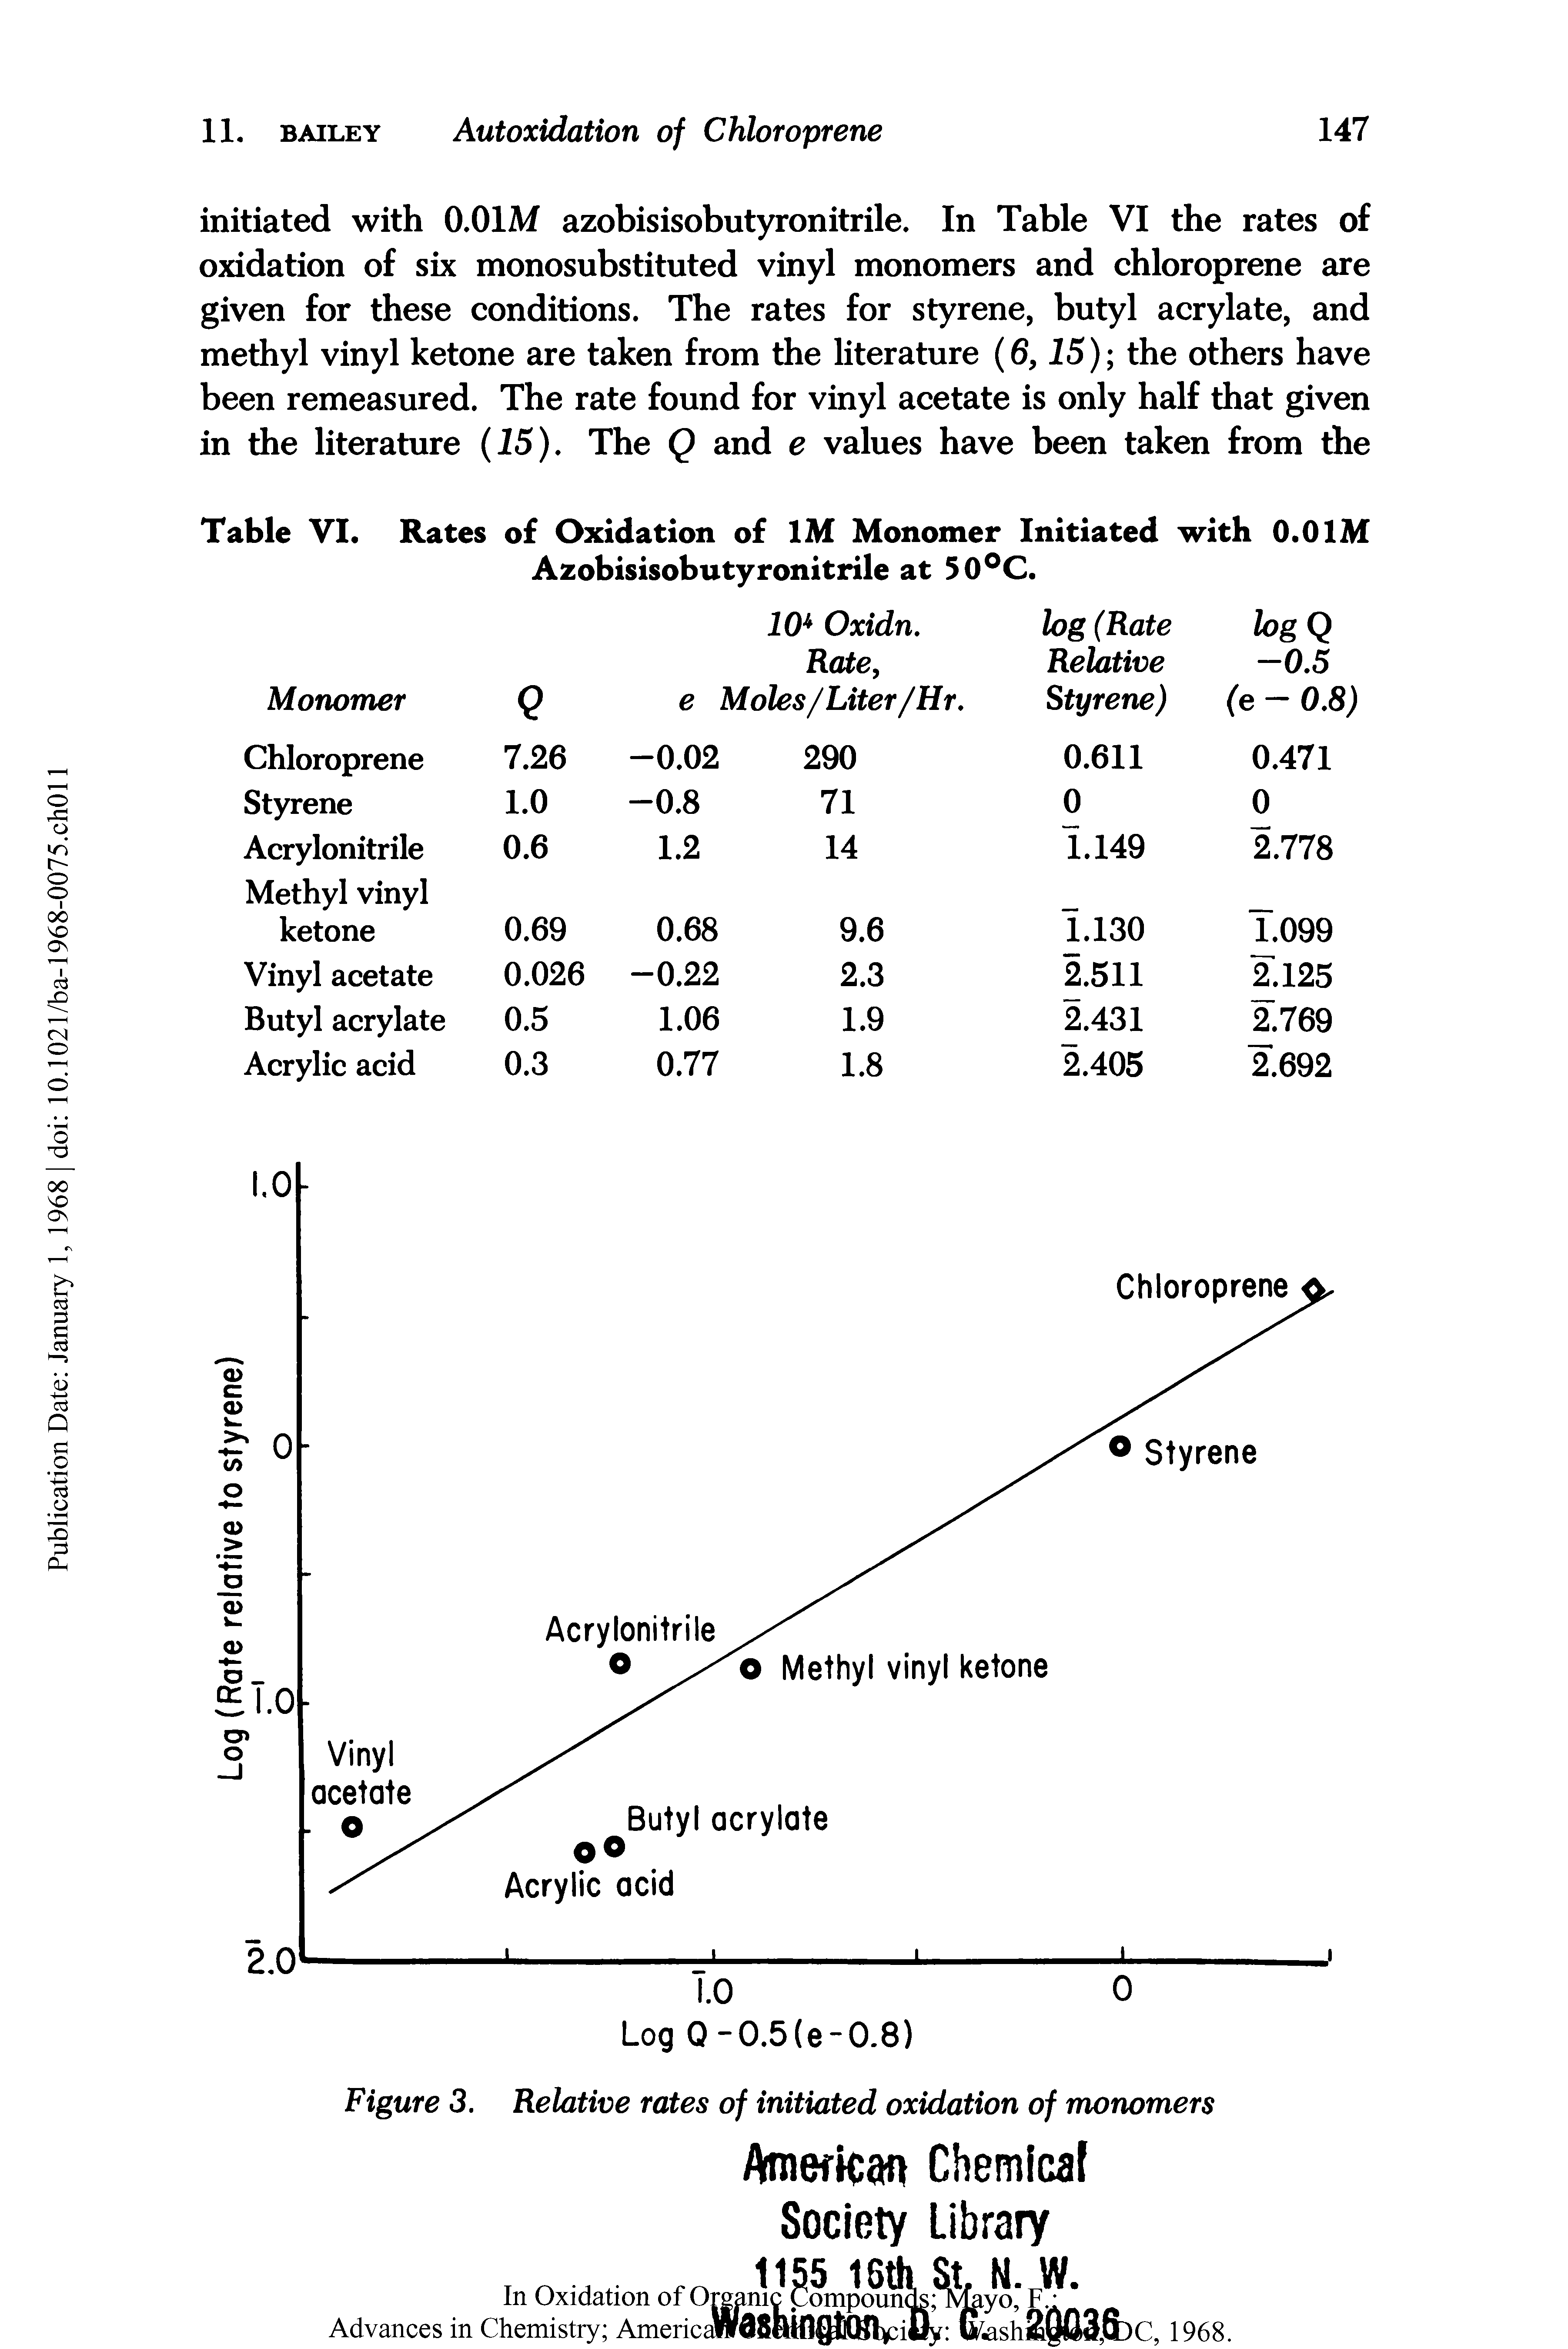 Table VI. Rates of Oxidation of 1M Monomer Initiated with 0.01M Azobisisobutyronitrile at 50°C.